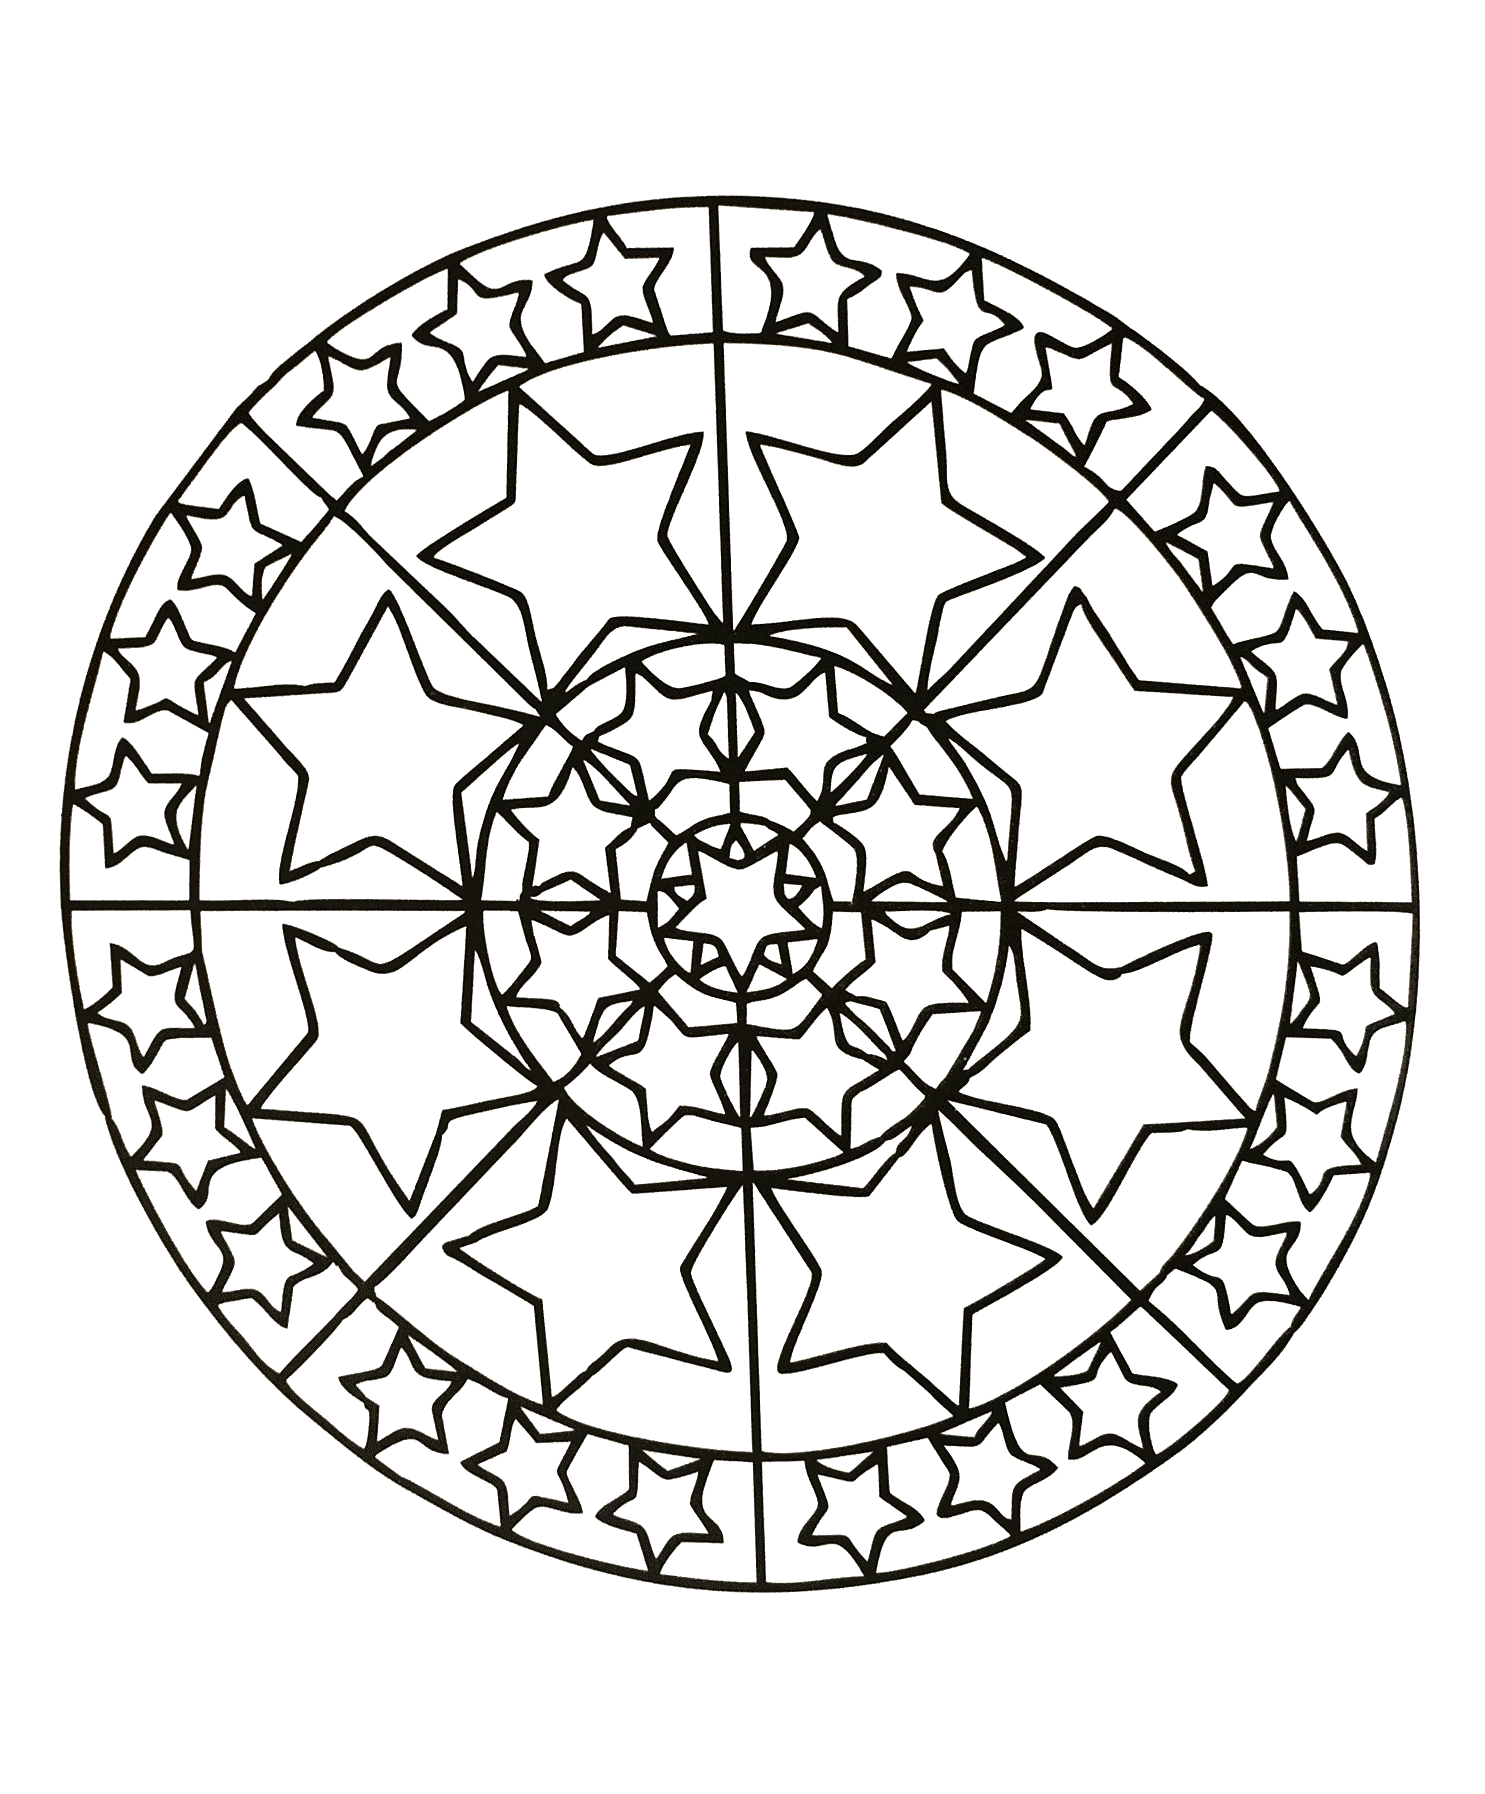 Mandalas to download for free - 13 - Image with : , 